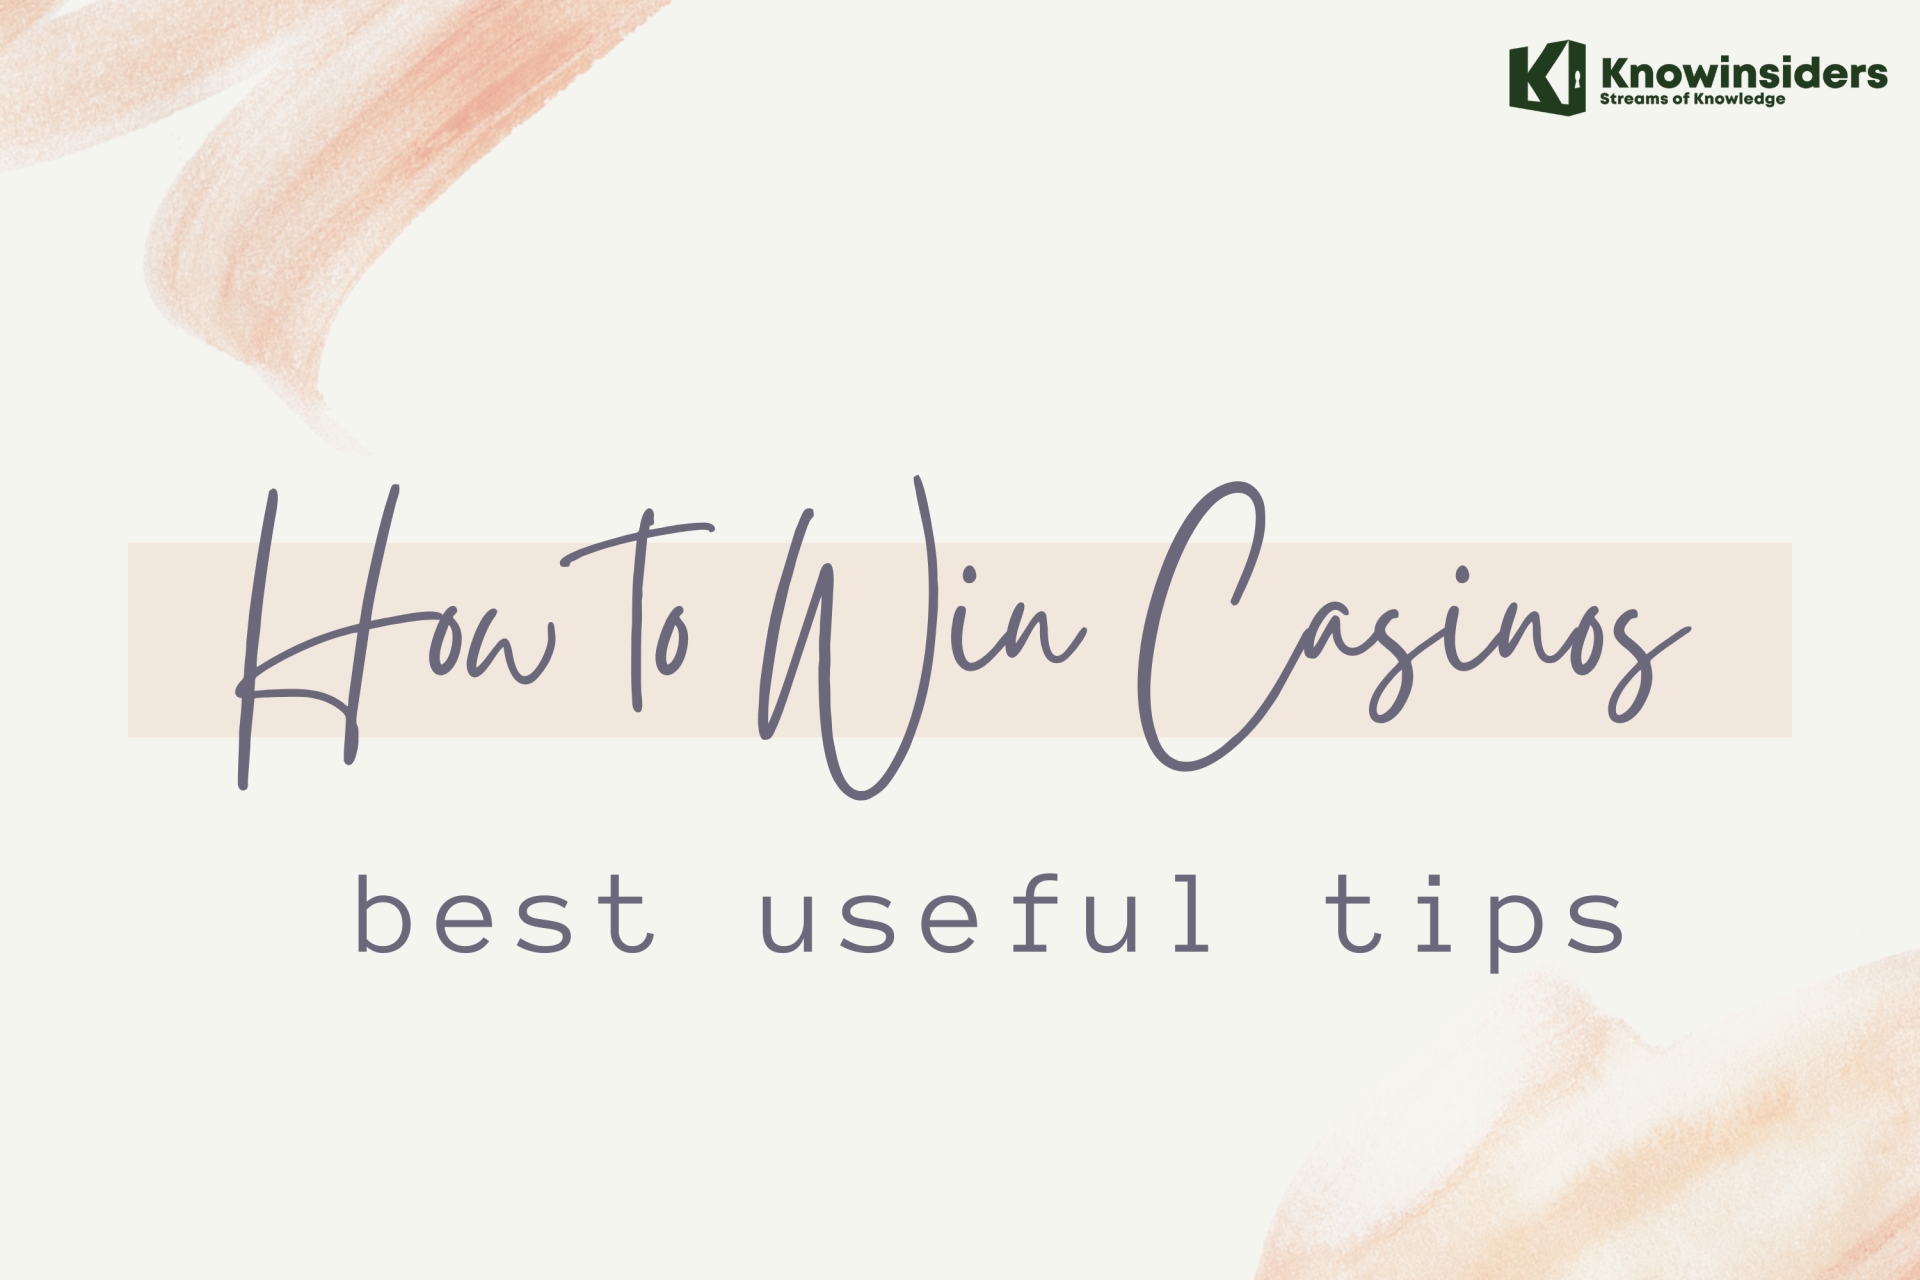 How To Win In A Casino: Best Tips & Tricks to Improve Your Chances